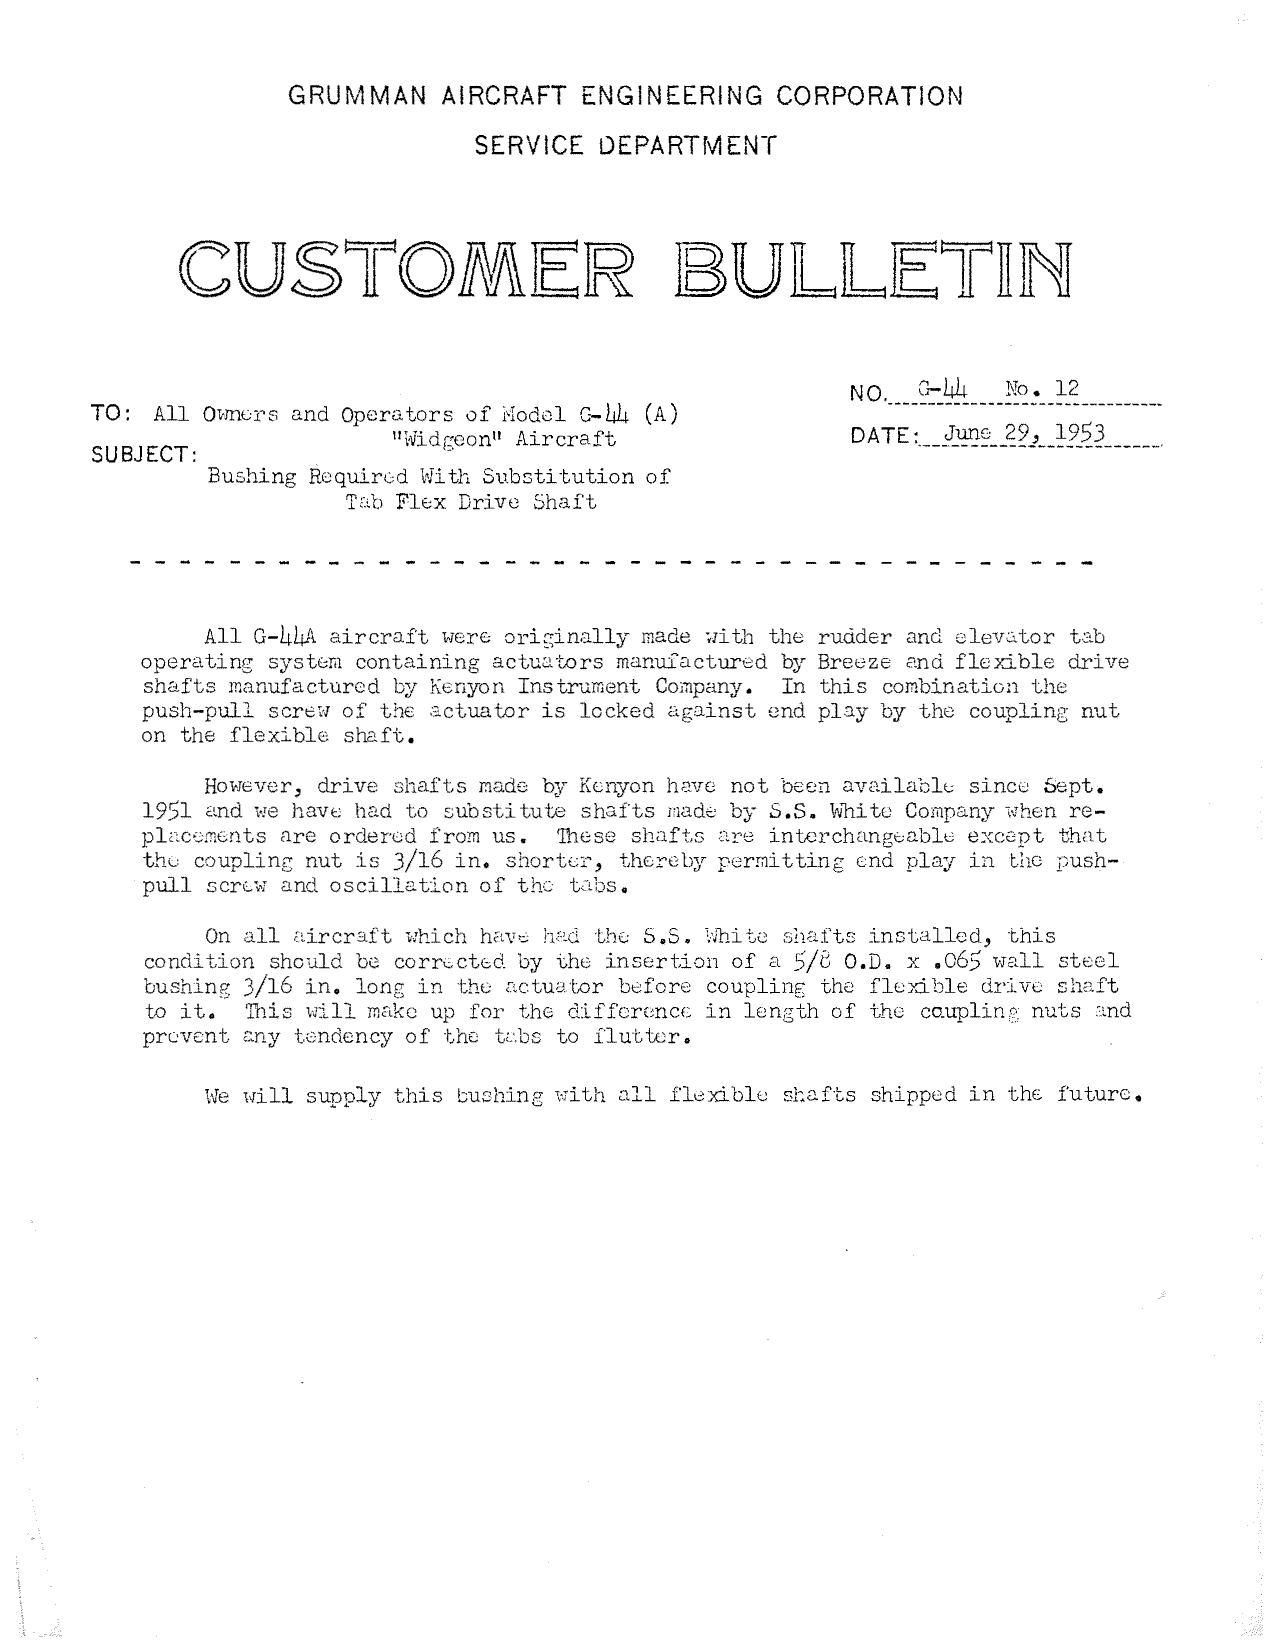 Sample page 1 from AirCorps Library document: Bushing Required with Substitution of Tab Flex Drive Shaft for Widgeon Model G-44